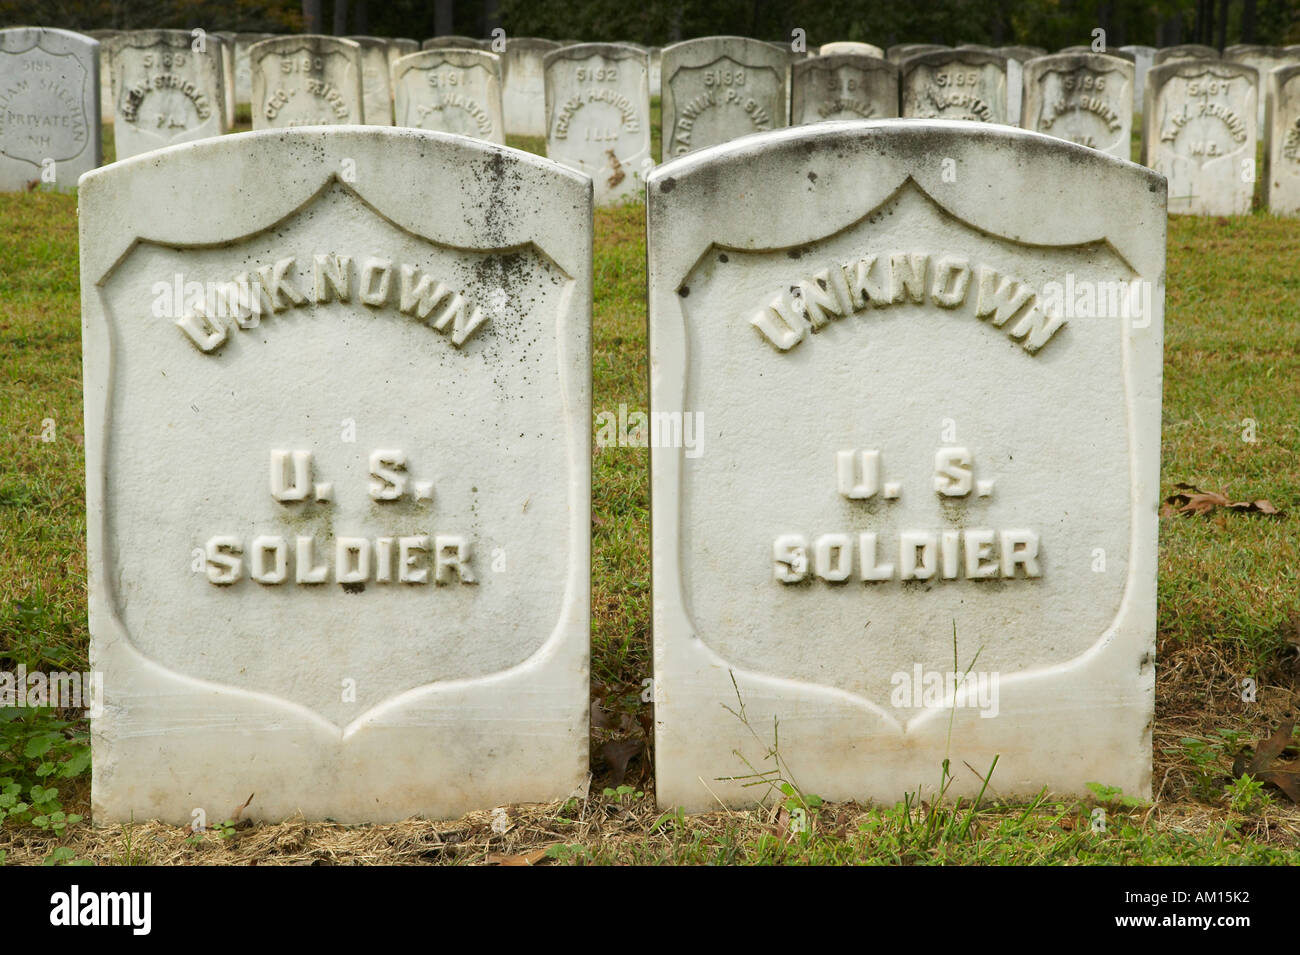 Tombs of the Unknown Soldiers National Park Andersonville or Camp Sumter Civil War prison and cemetery Stock Photo